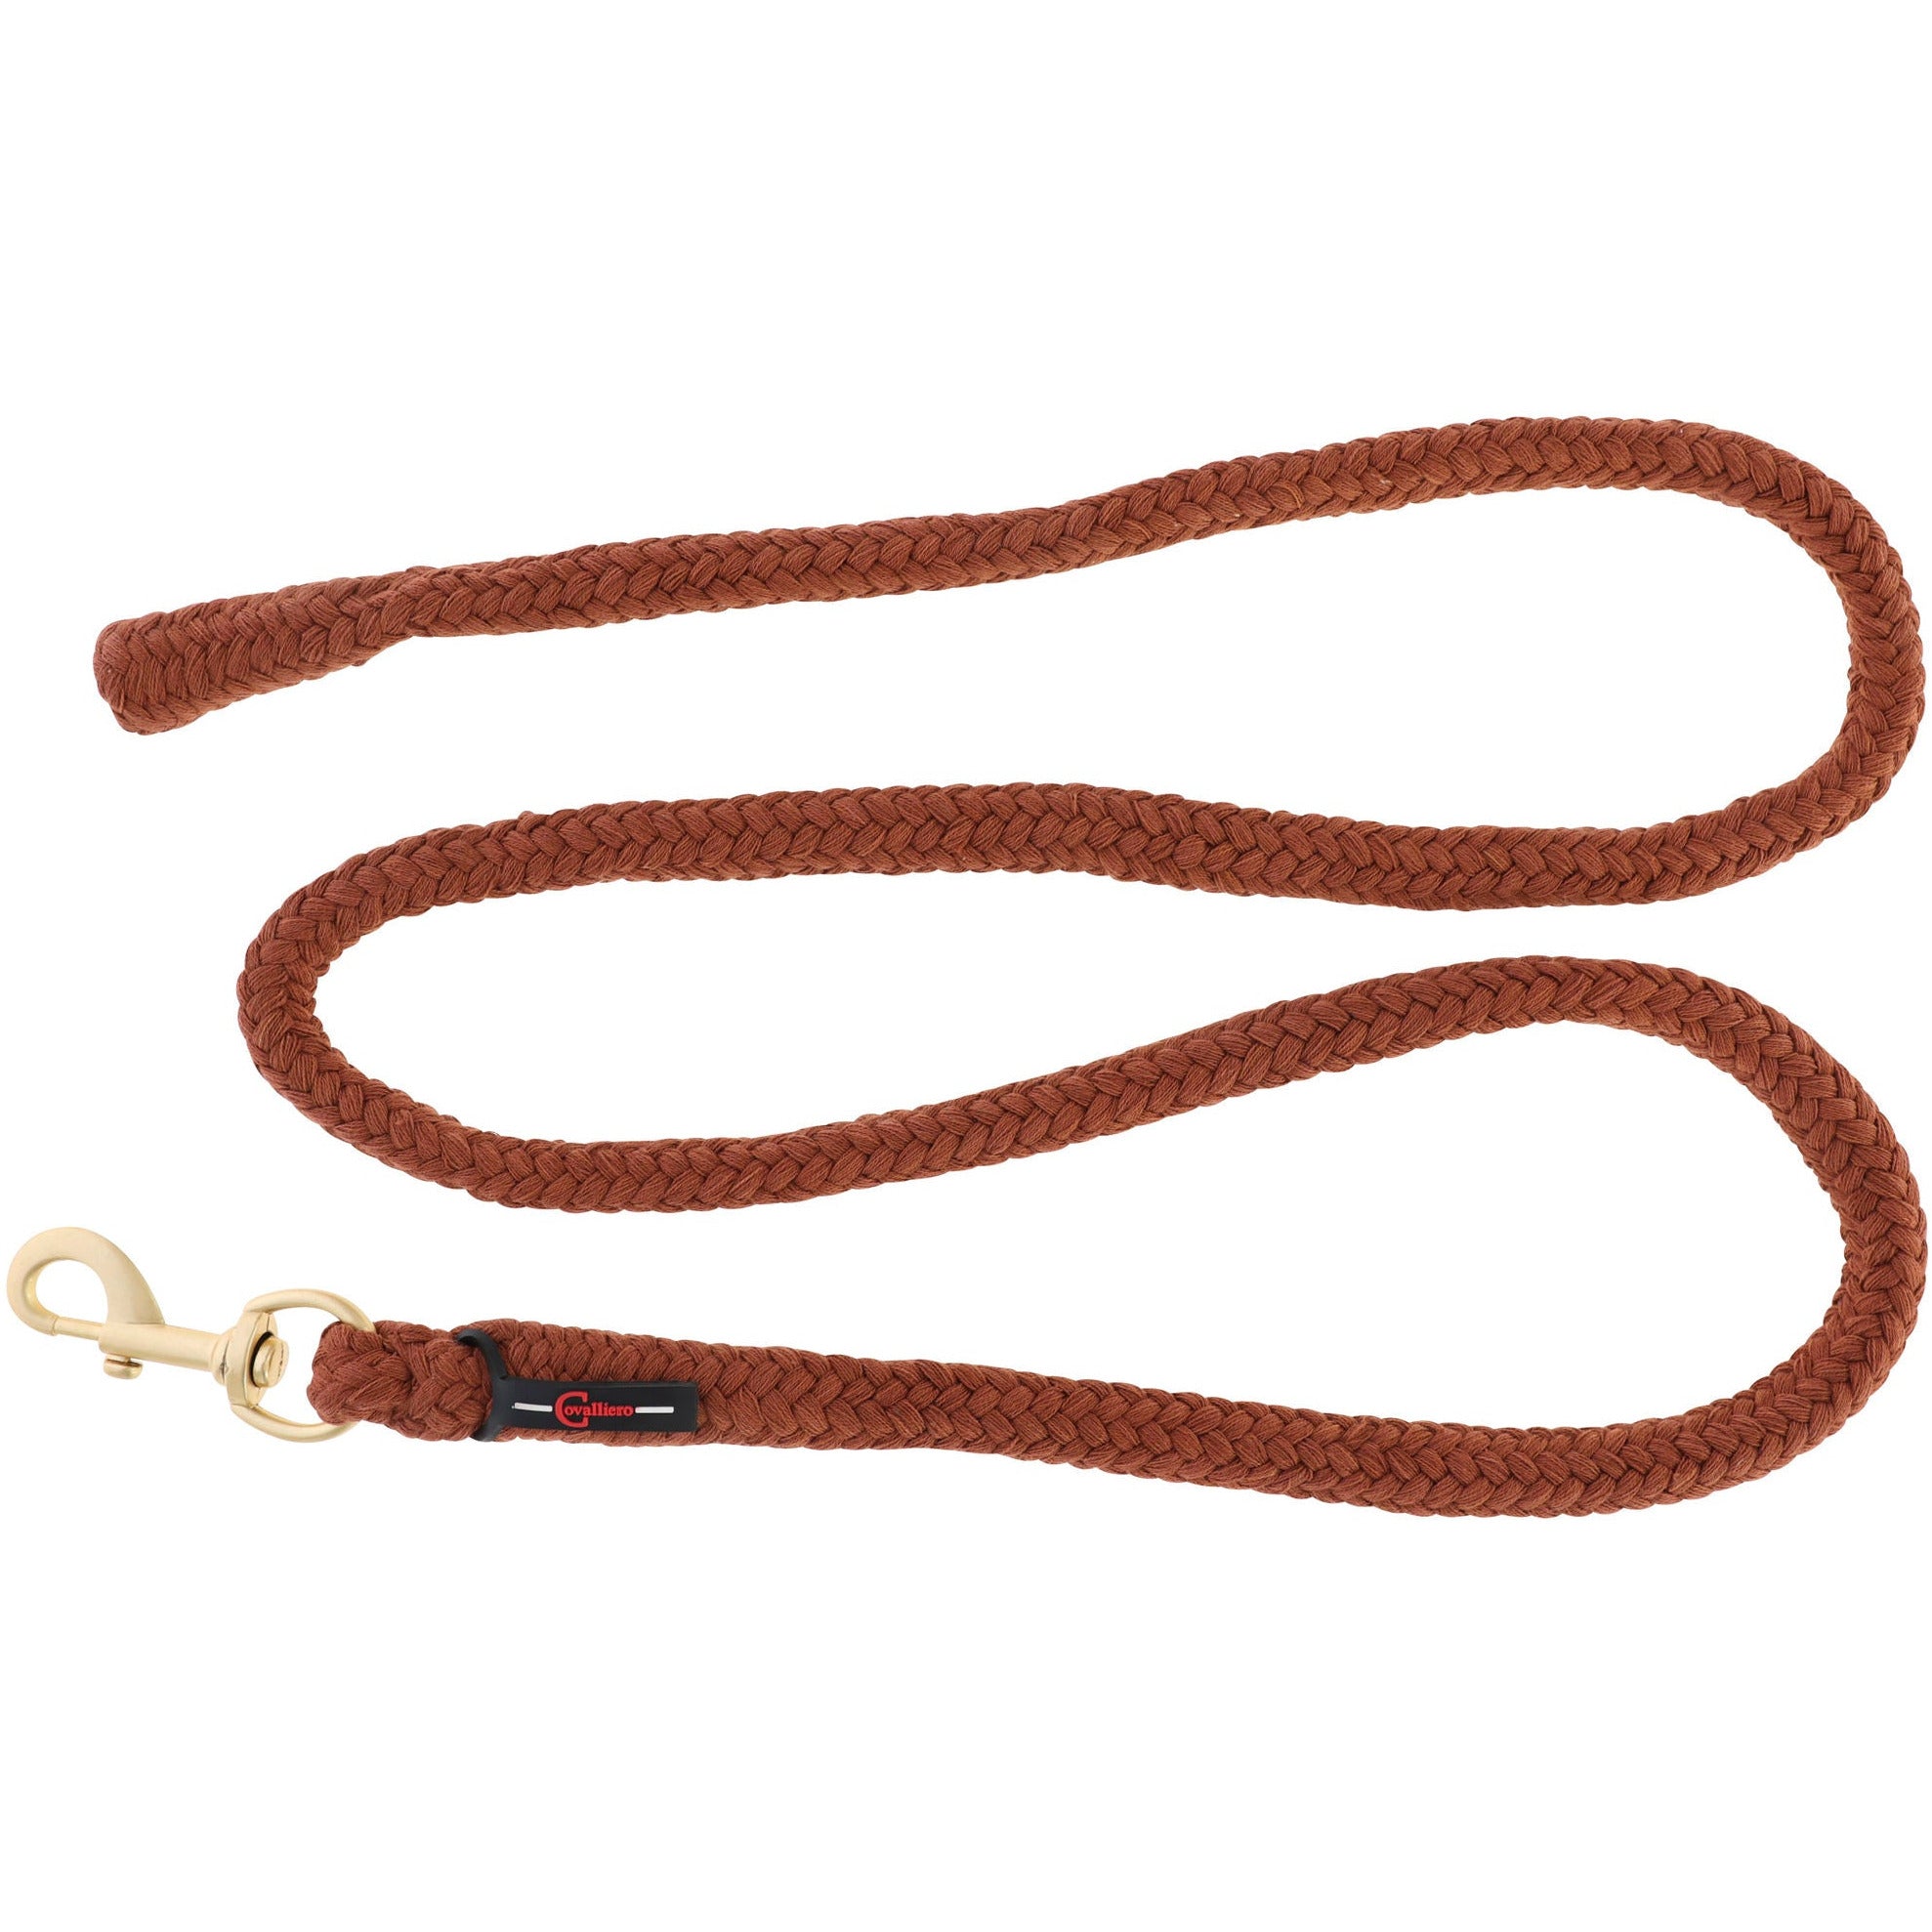 Covalliero AW22 Lead Rope